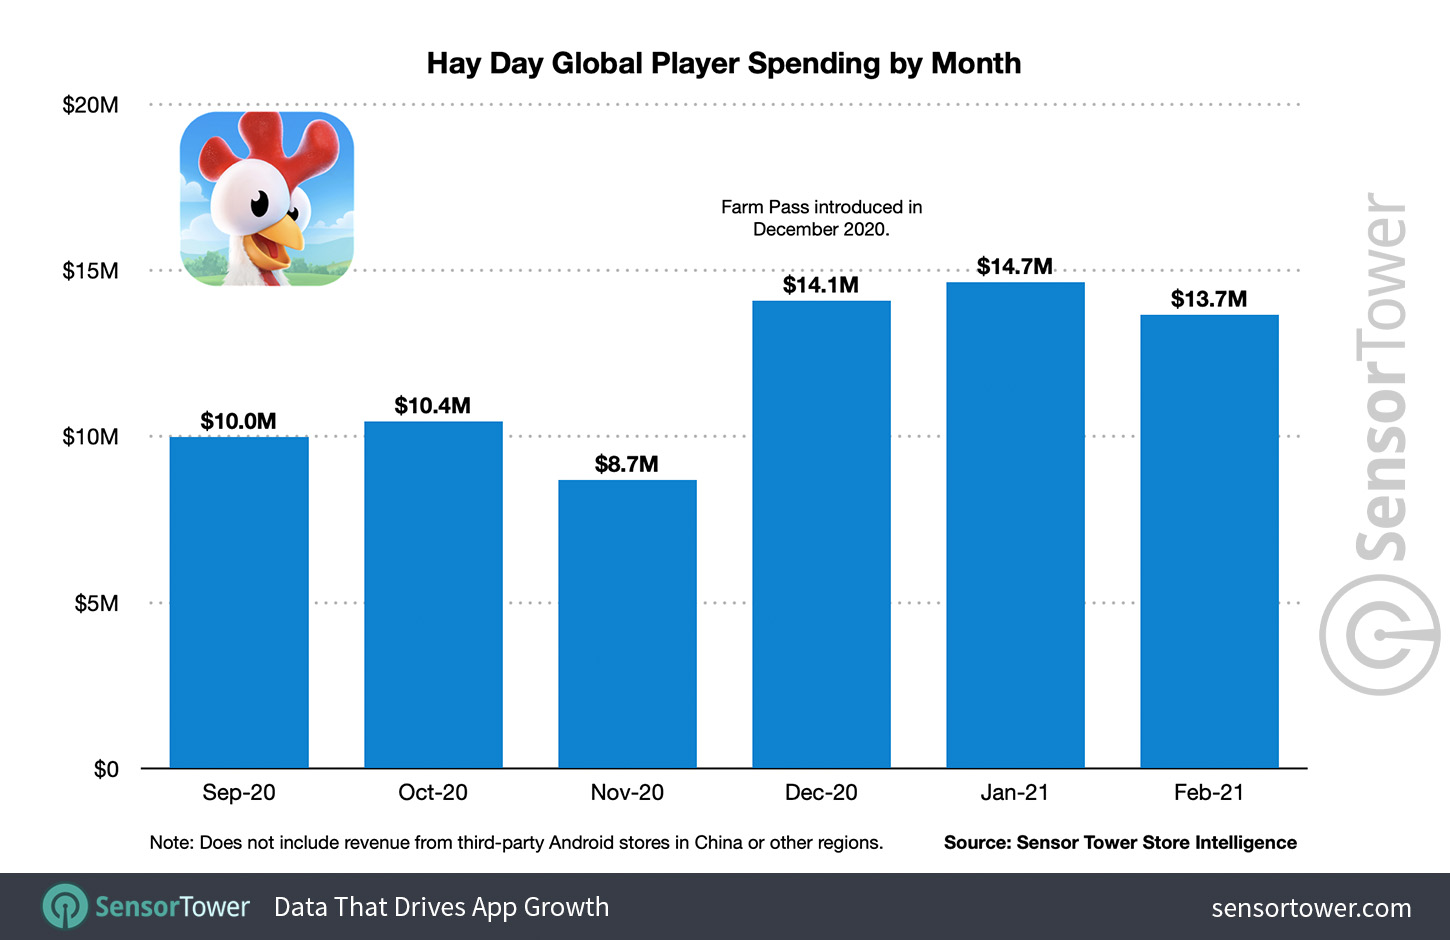 Hay Day Global Player Spending by Month